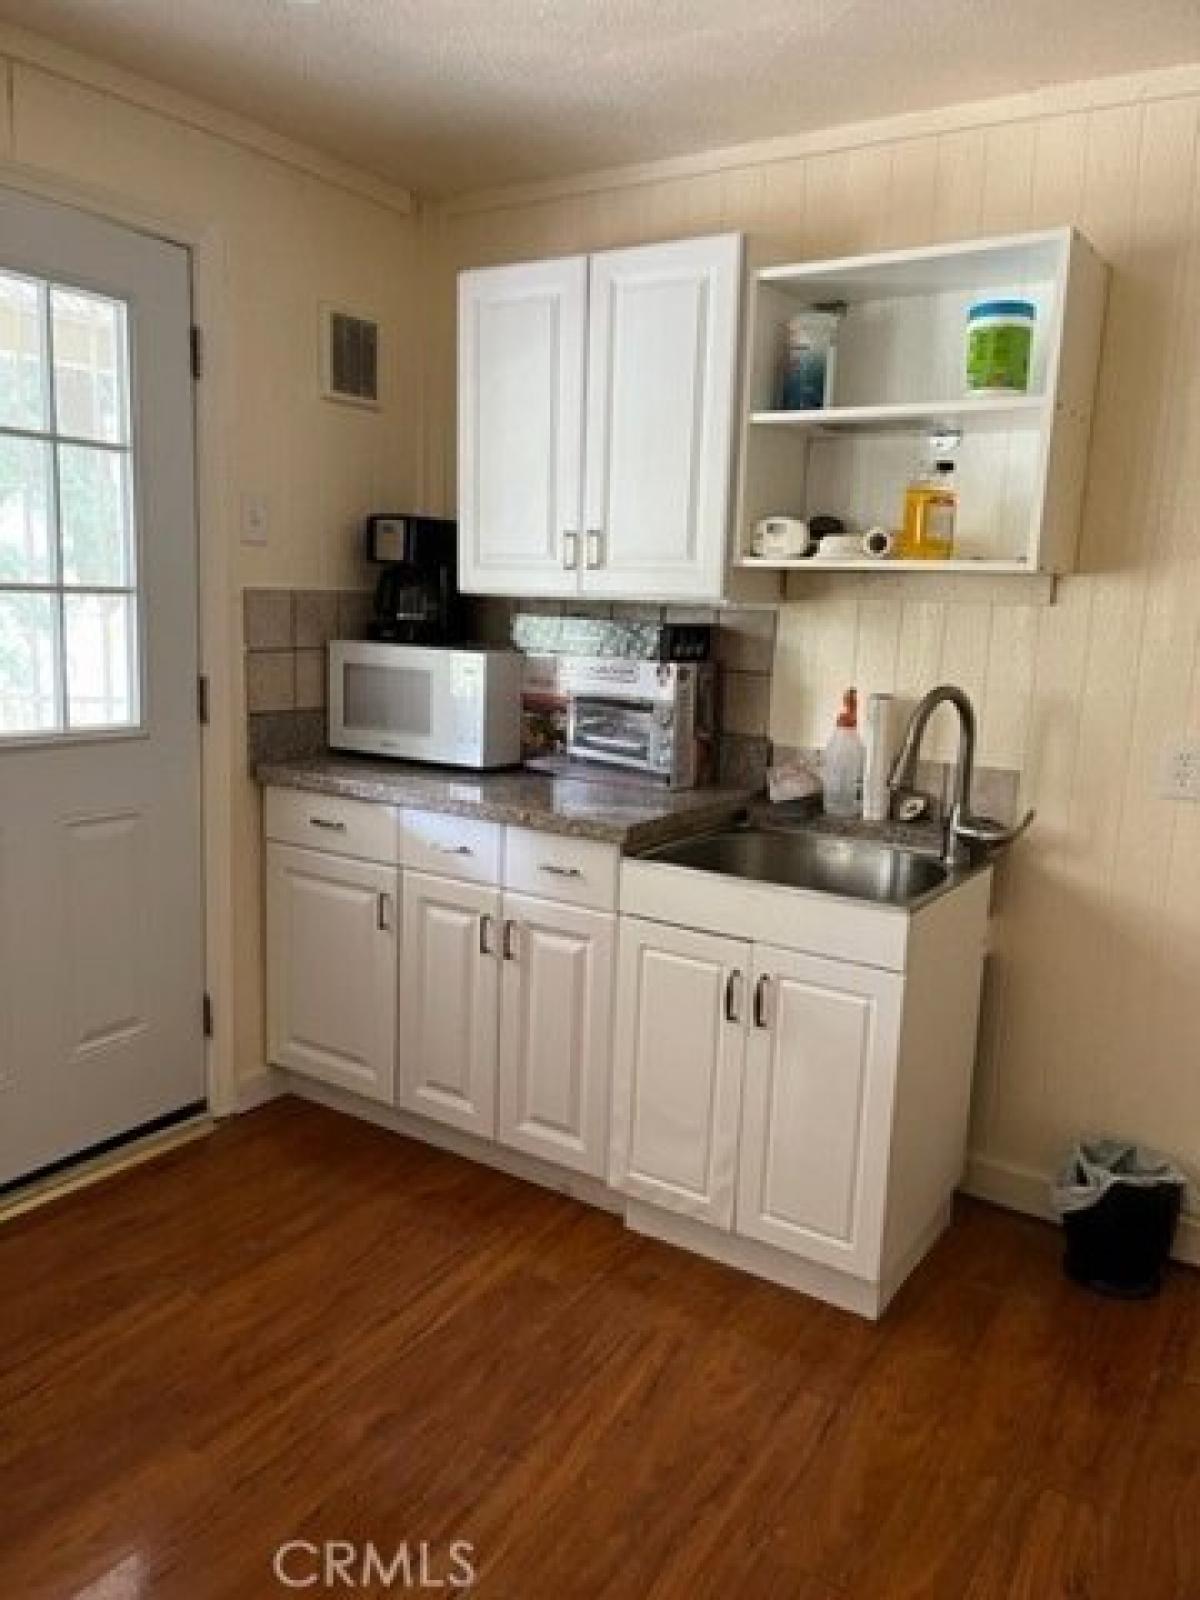 Picture of Home For Rent in Crestline, California, United States